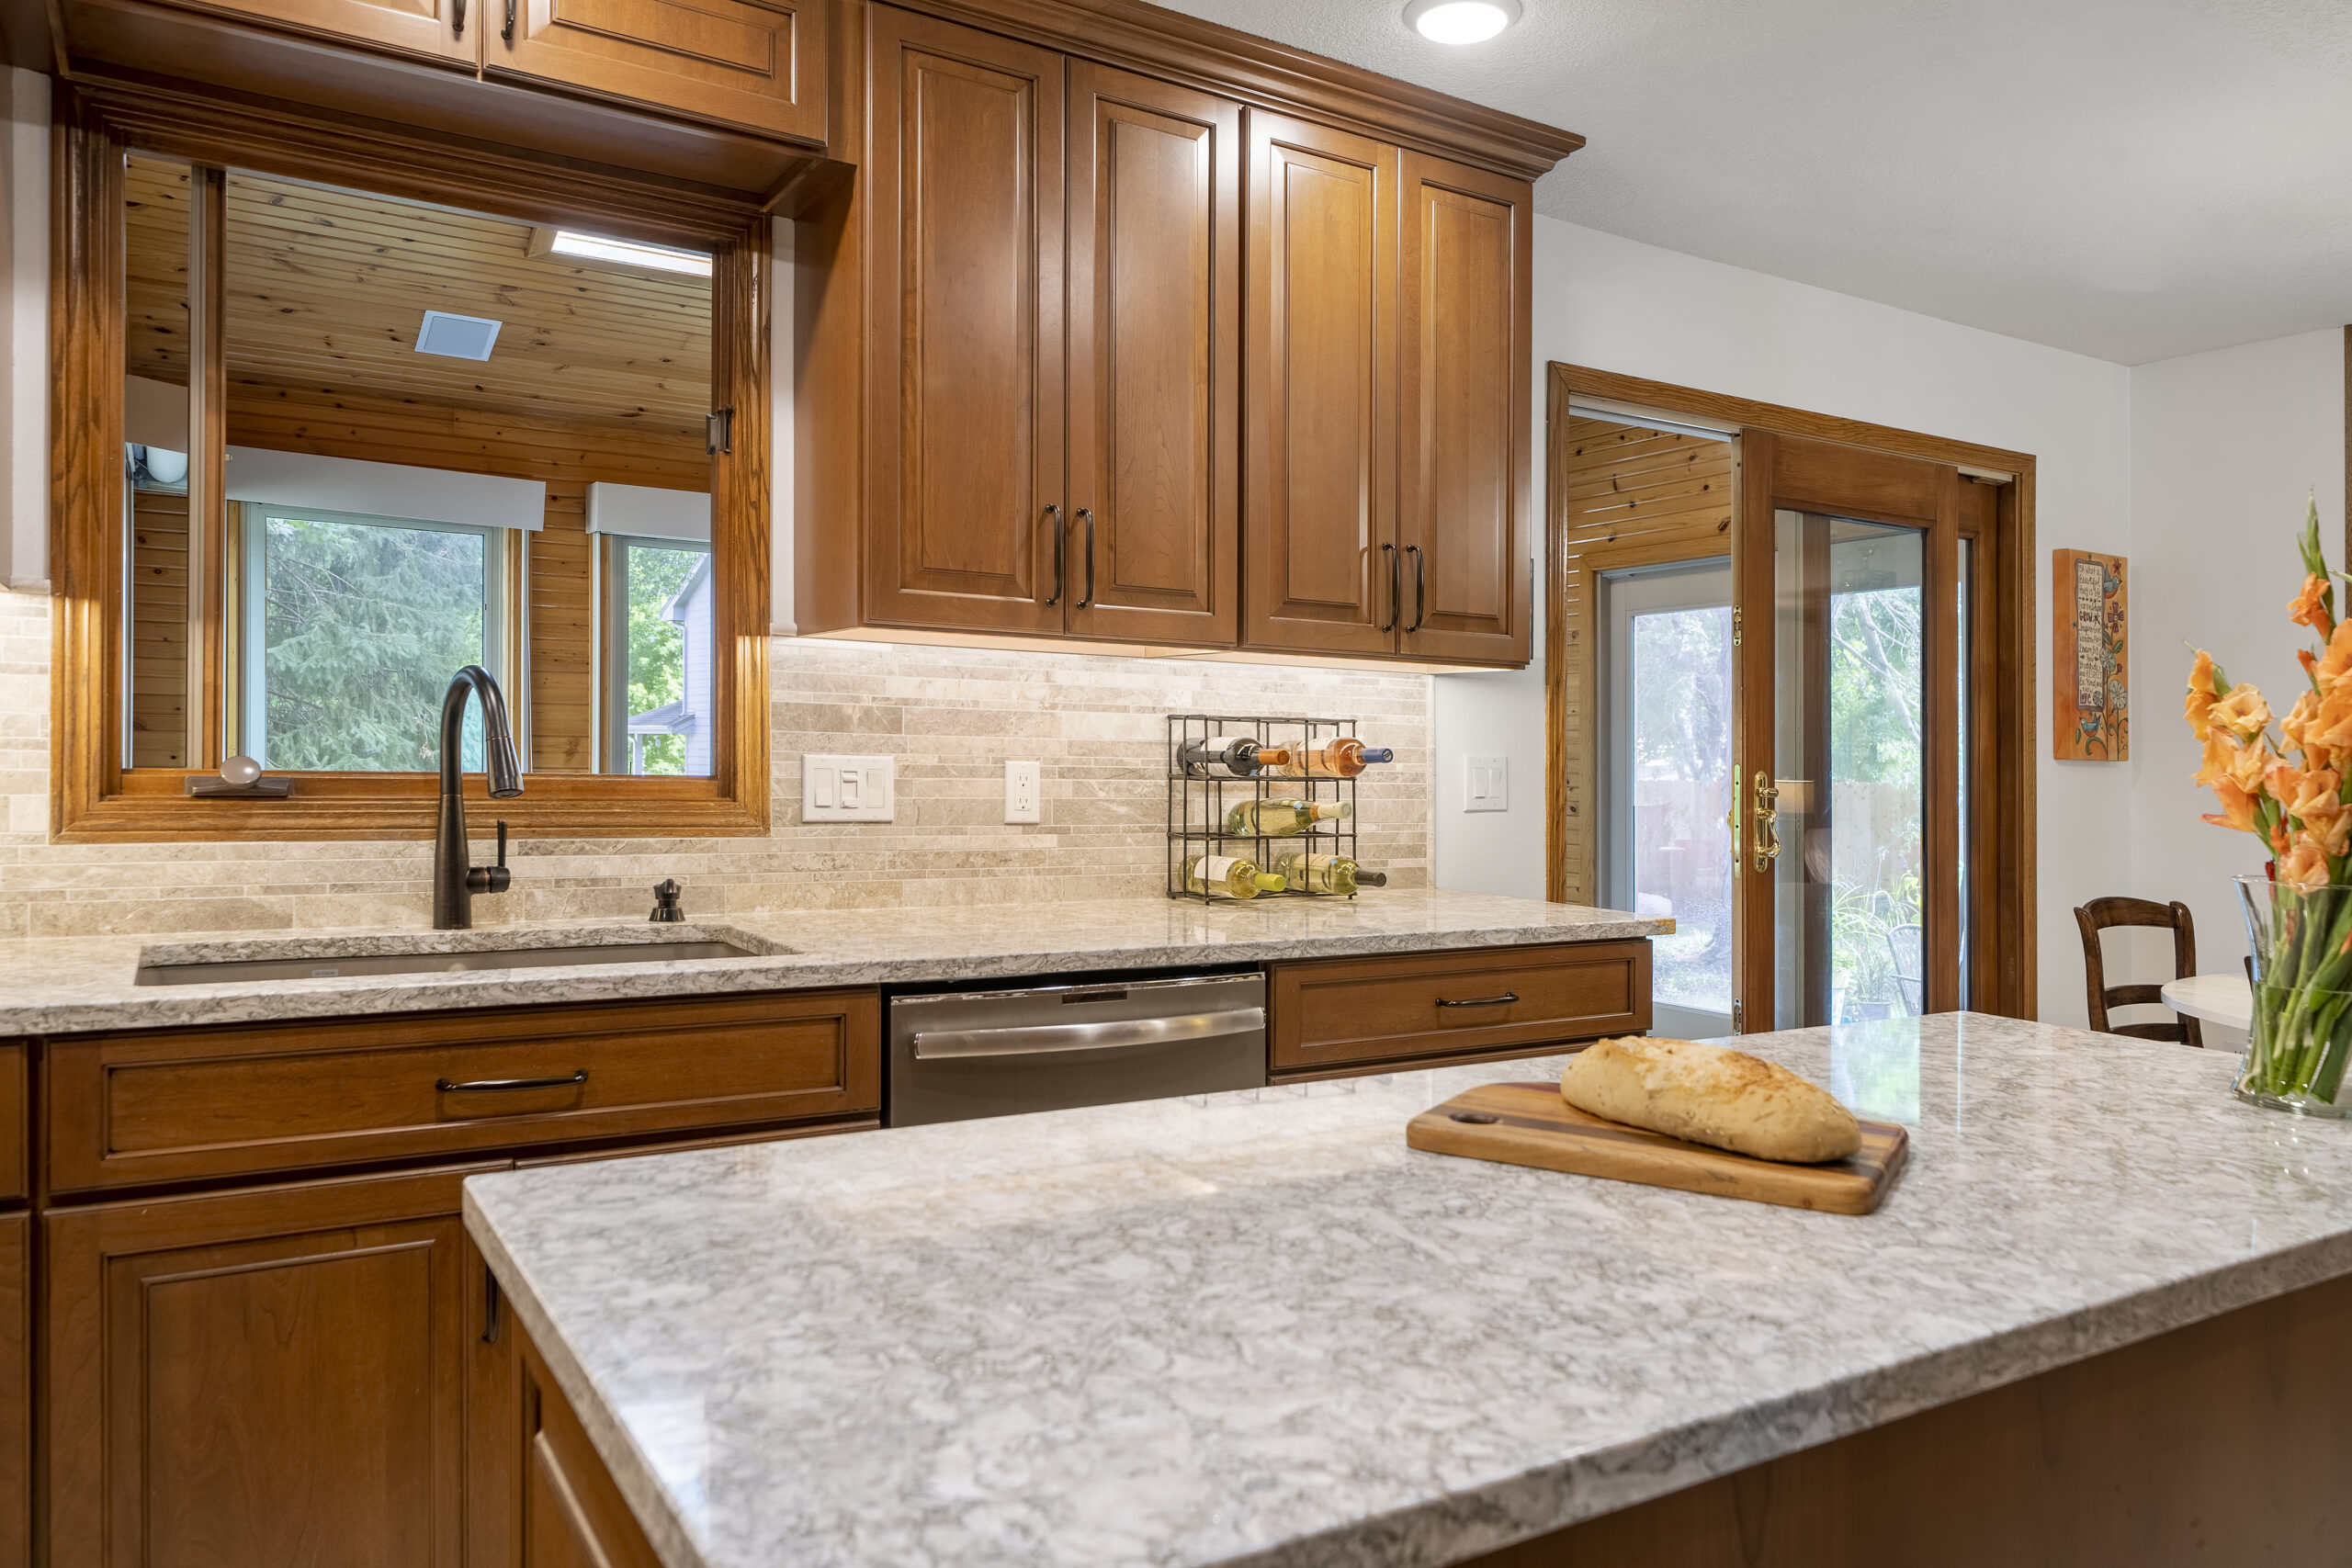 This is an Urbandale remodel in a traditional home which features wood cabinets and quartz countertops.